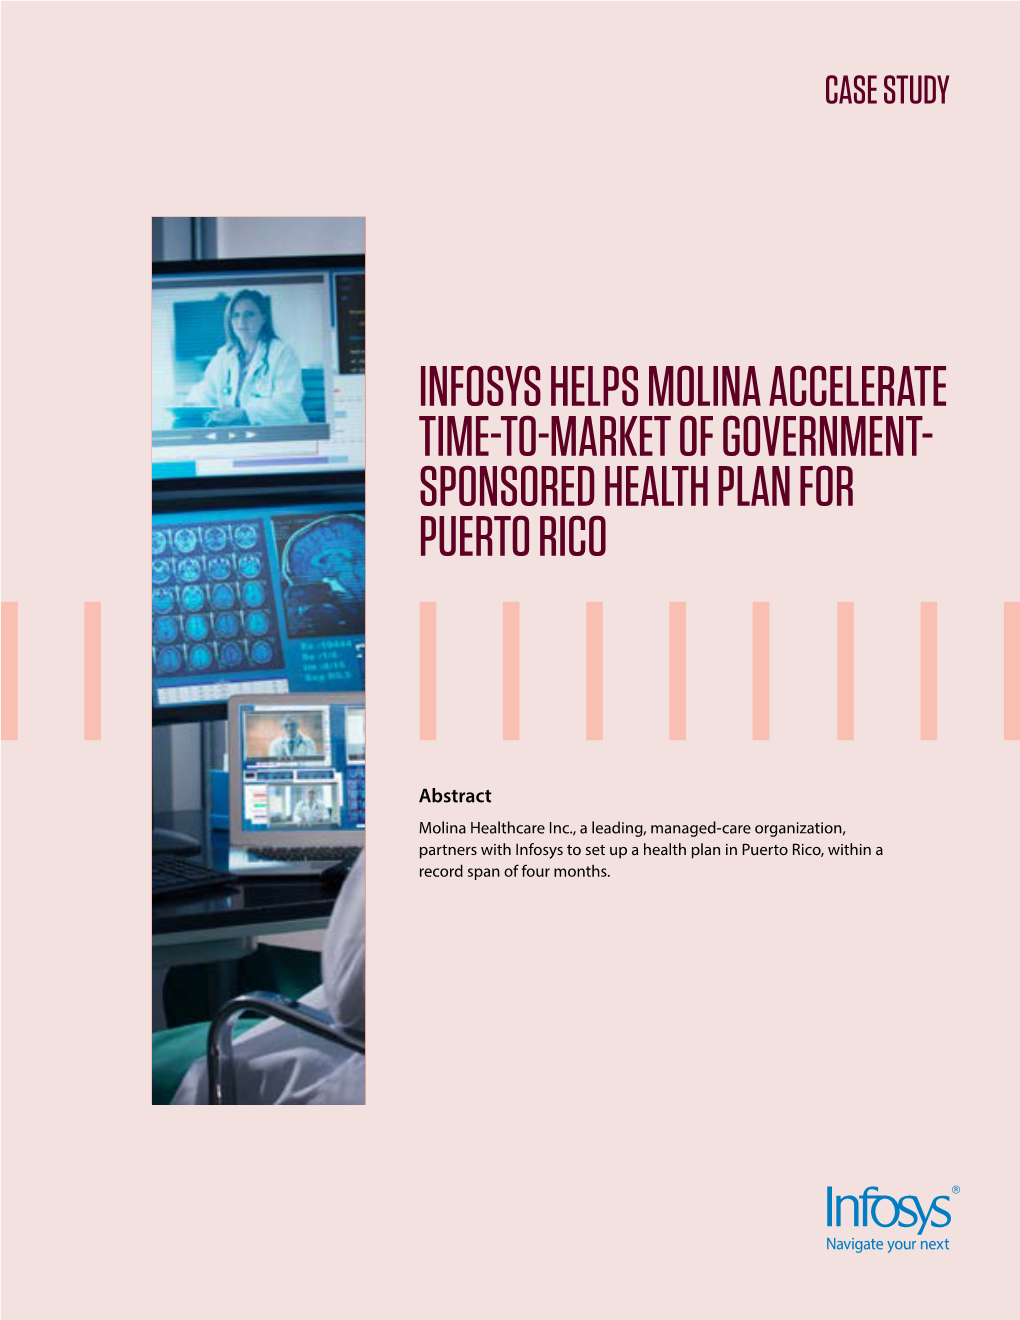 Infosys Helps Molina Accelerate Time-To-Market of Government-Sponsored Health Plan for Puerto Rico